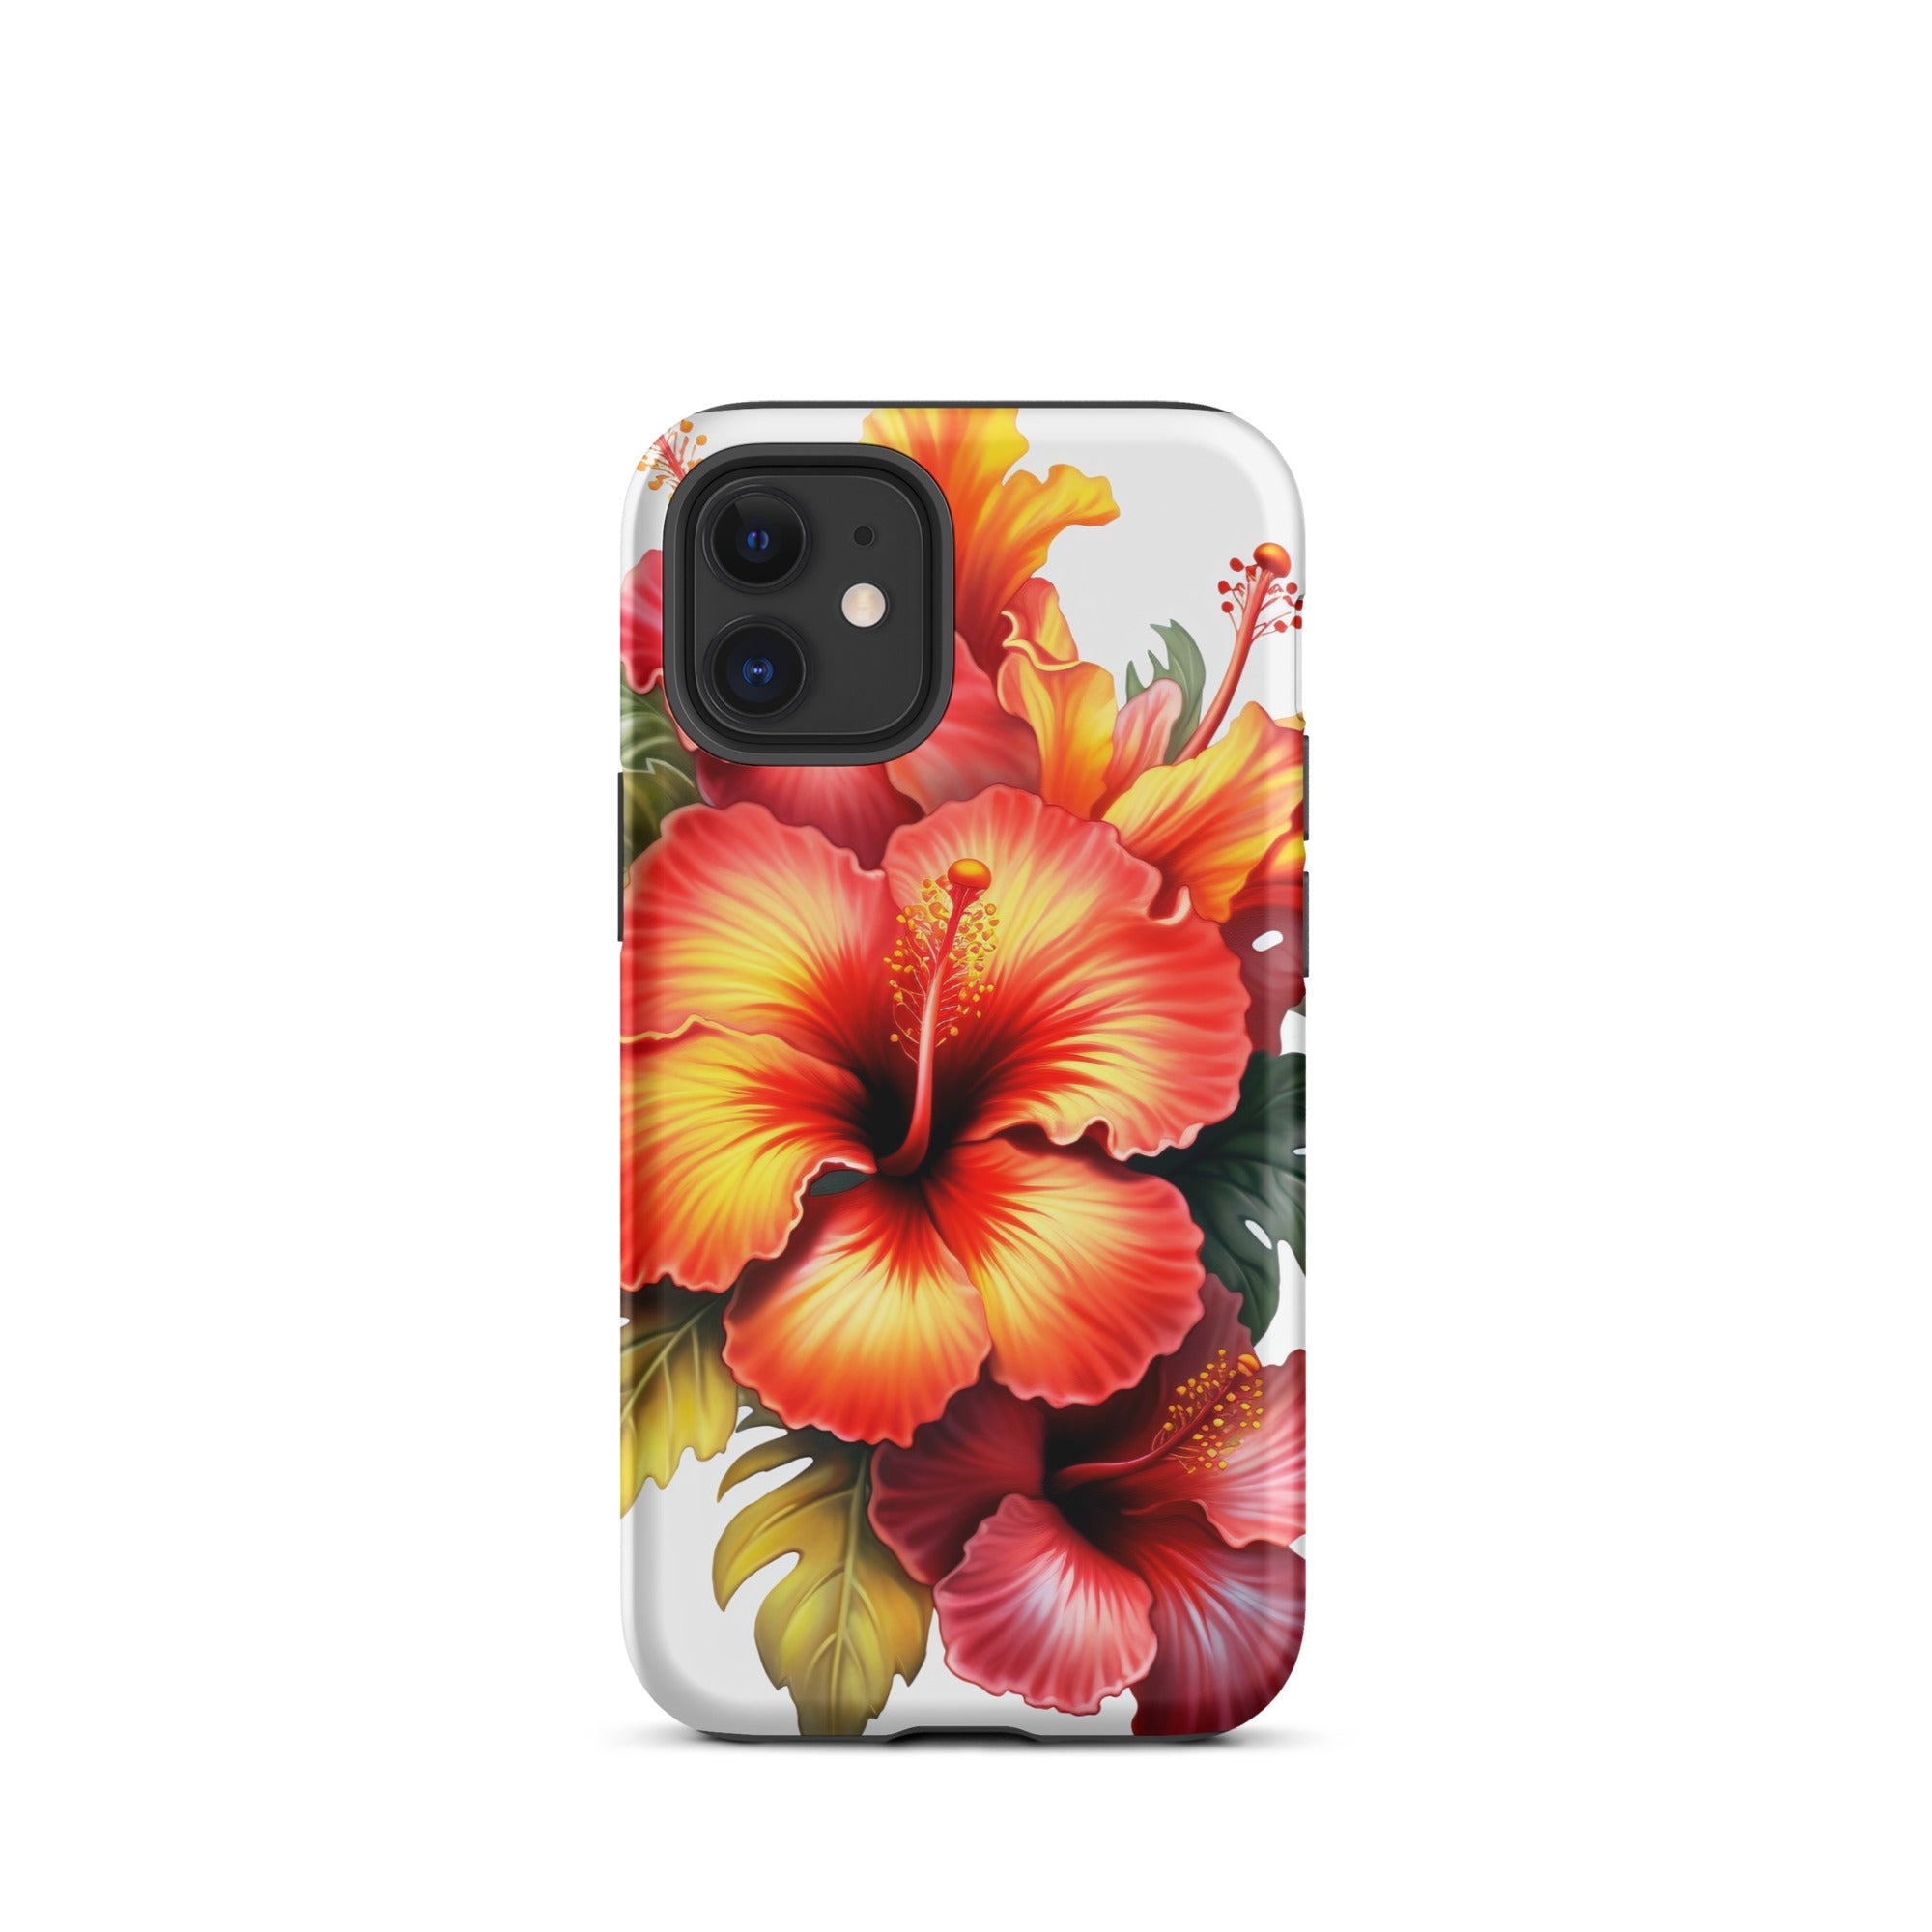 Hibiscus Flower iPhone Case by Visual Verse - Image 8